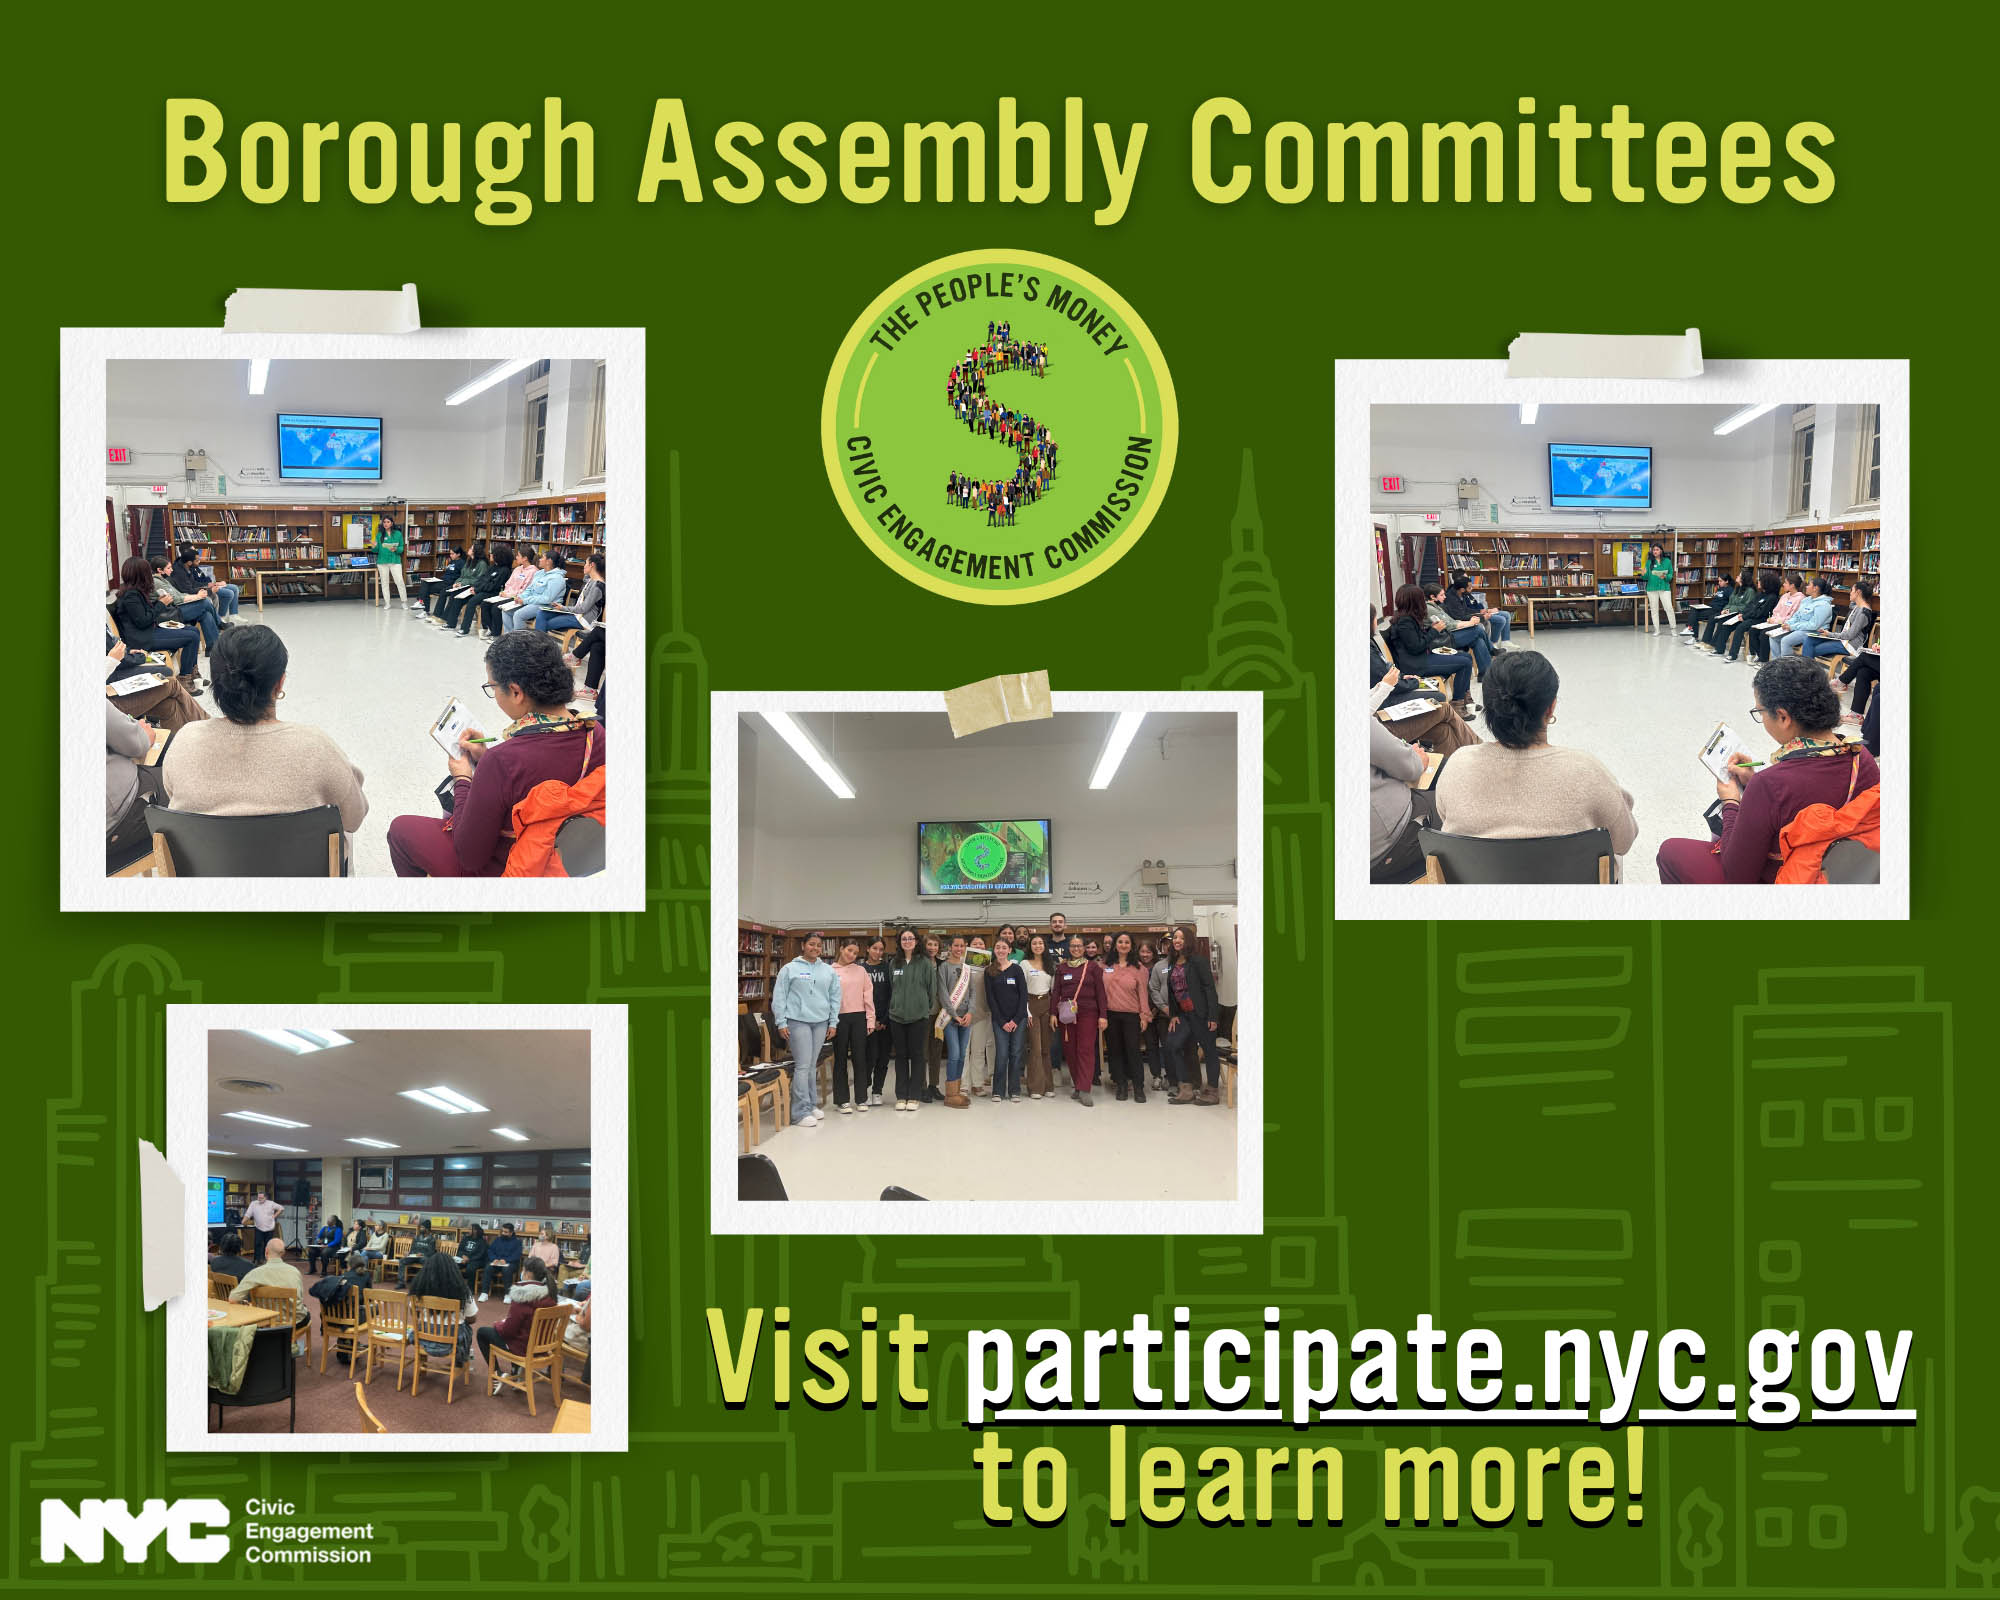 Photo collage of The People's Money Idea Borough Assembly Committees.